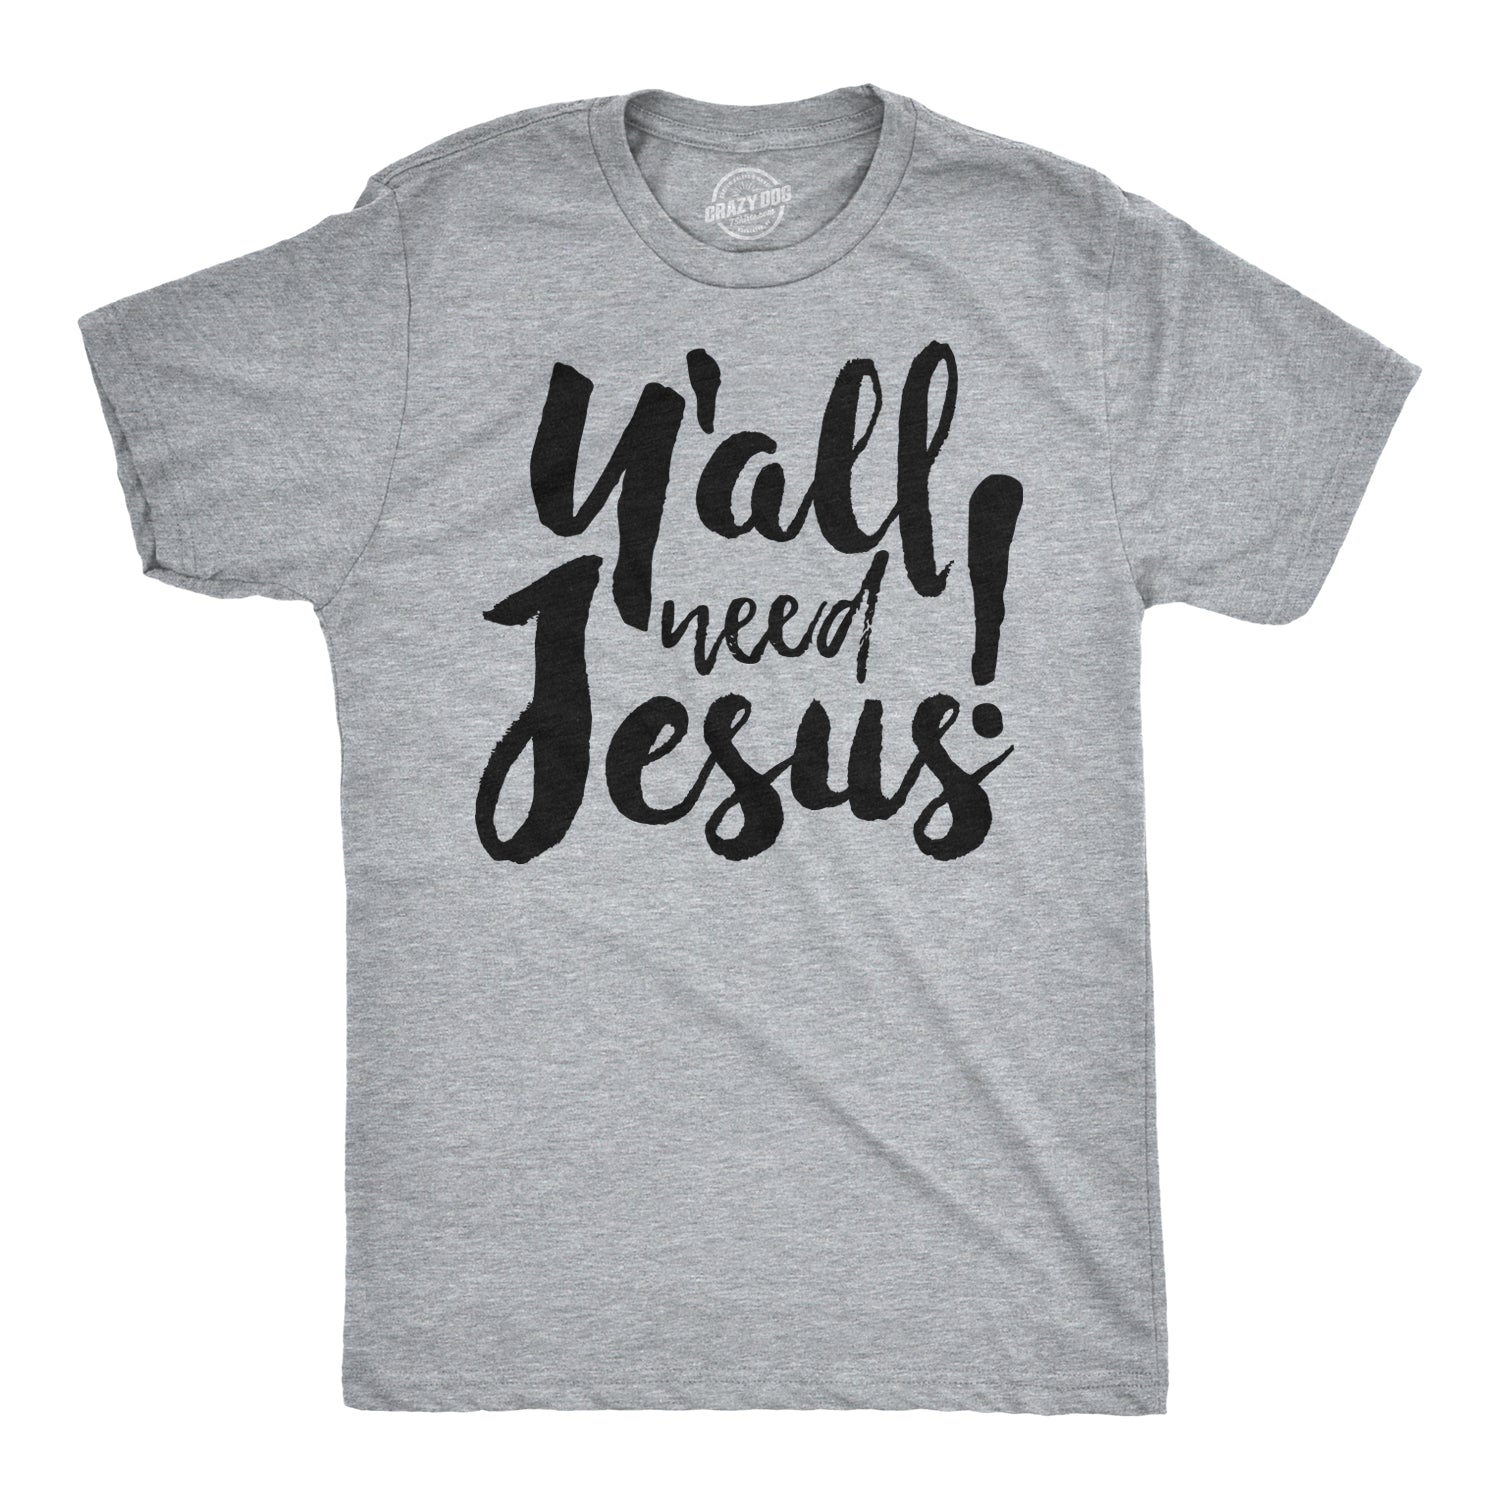 Funny Light Heather Grey - Yall Need Y'all Need Jesus Mens T Shirt Nerdy Easter Religion Tee